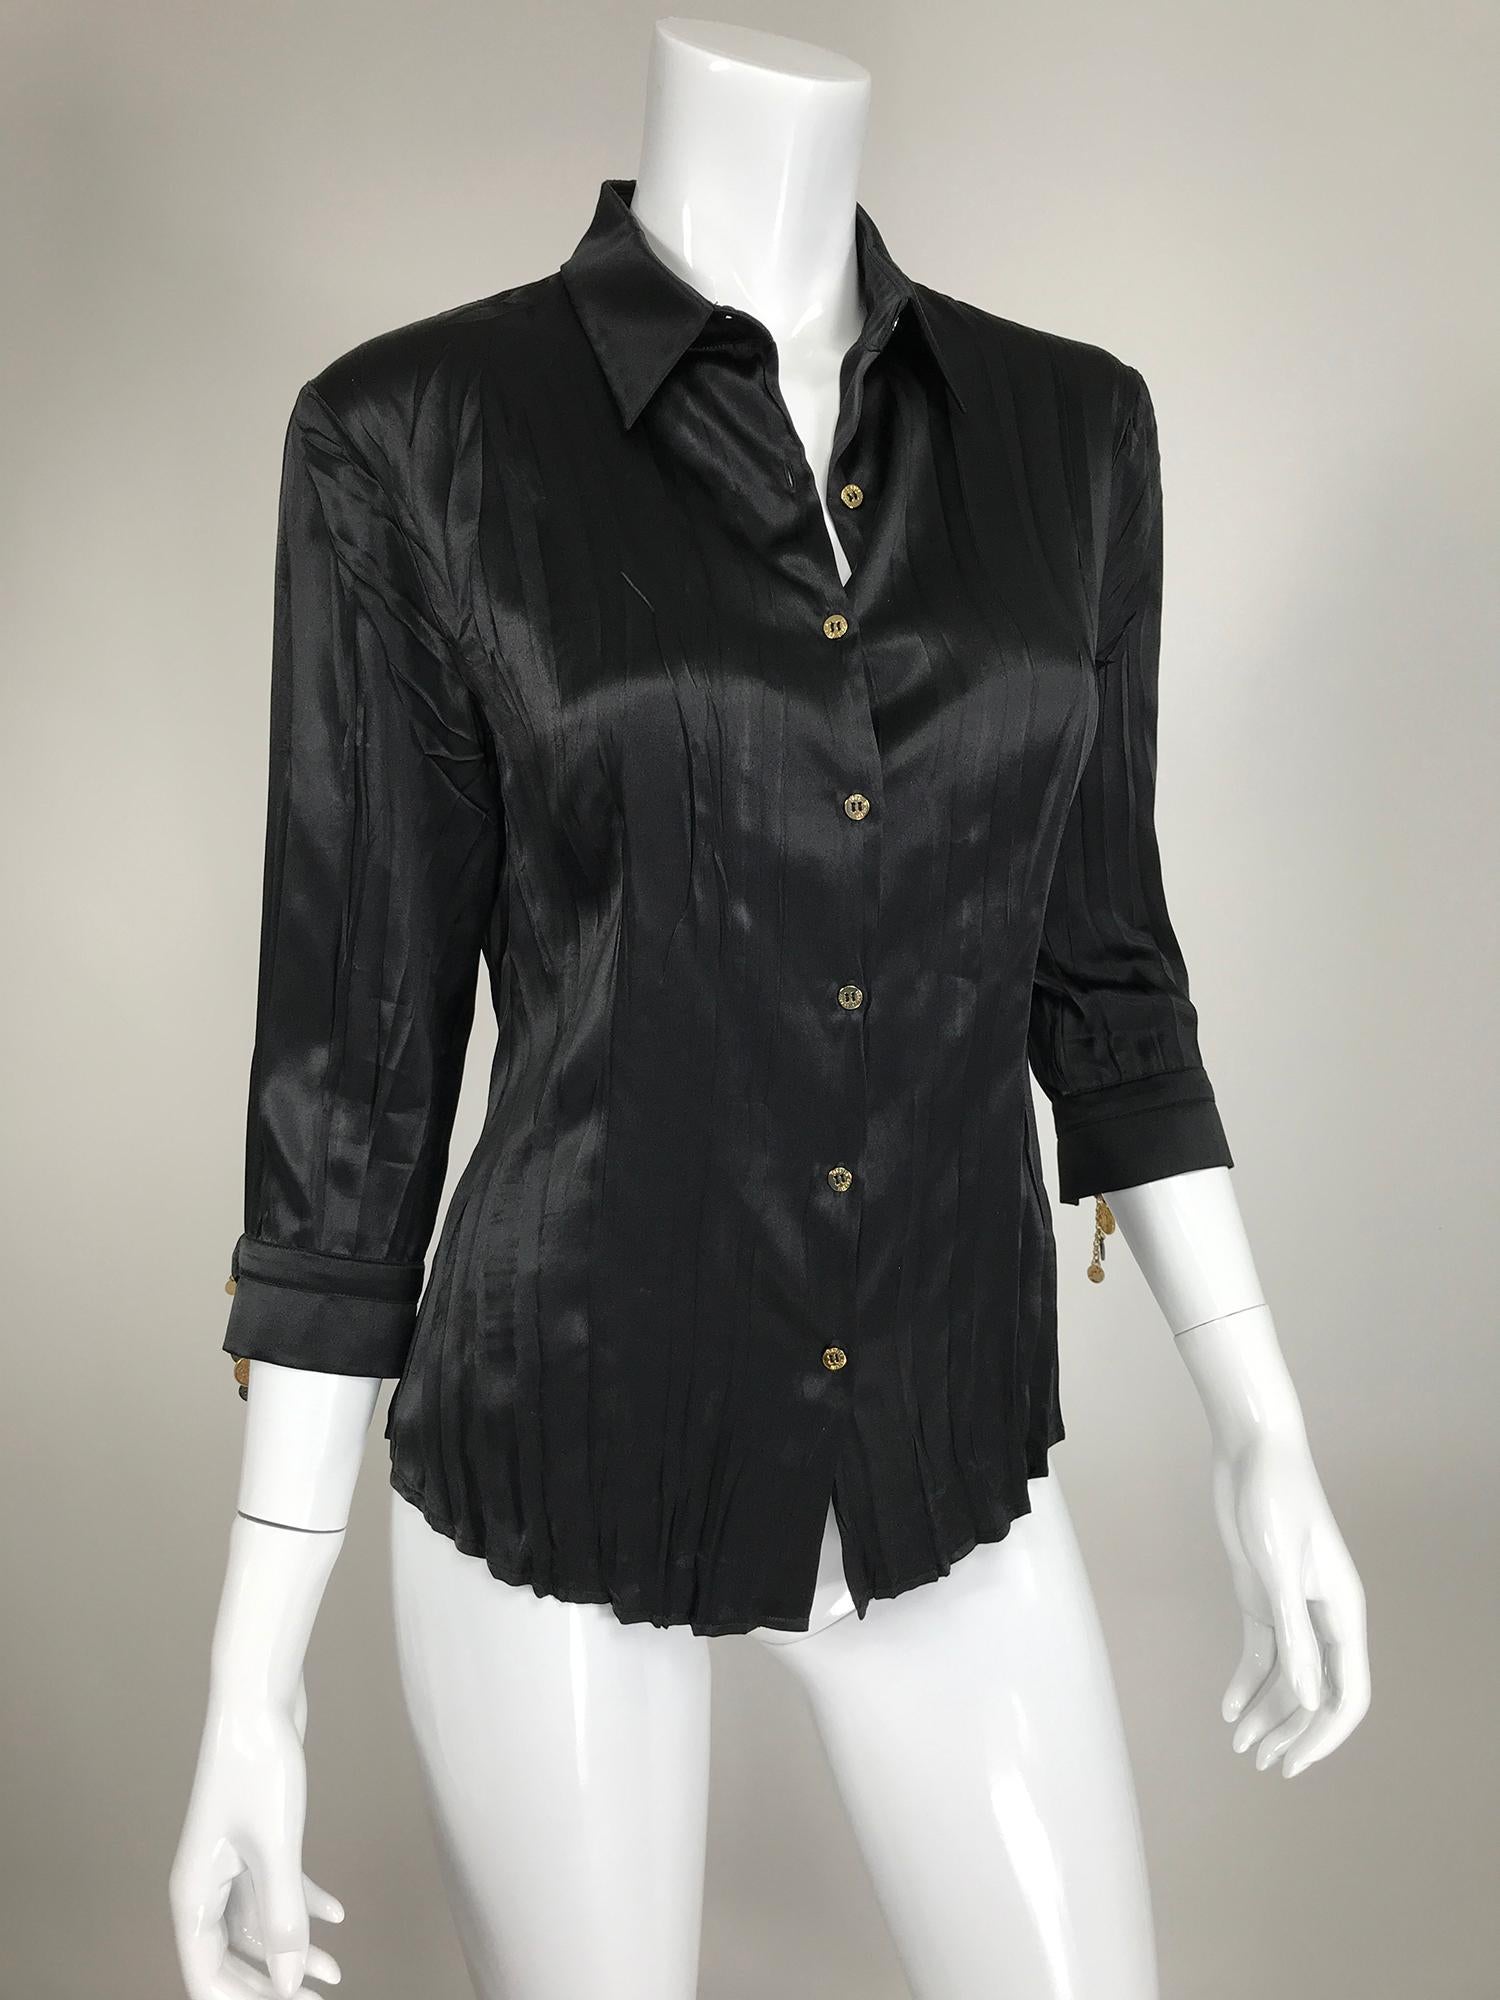 Roberto Cavalli pleated black silk satin jewel sleeve blouse. Relaxed pleated blouse with 3/4 length sleeves that have banded cuffs and gold & silver coin & chain closures. The blouse closes at the front with gold logo buttons. Marked size medium.